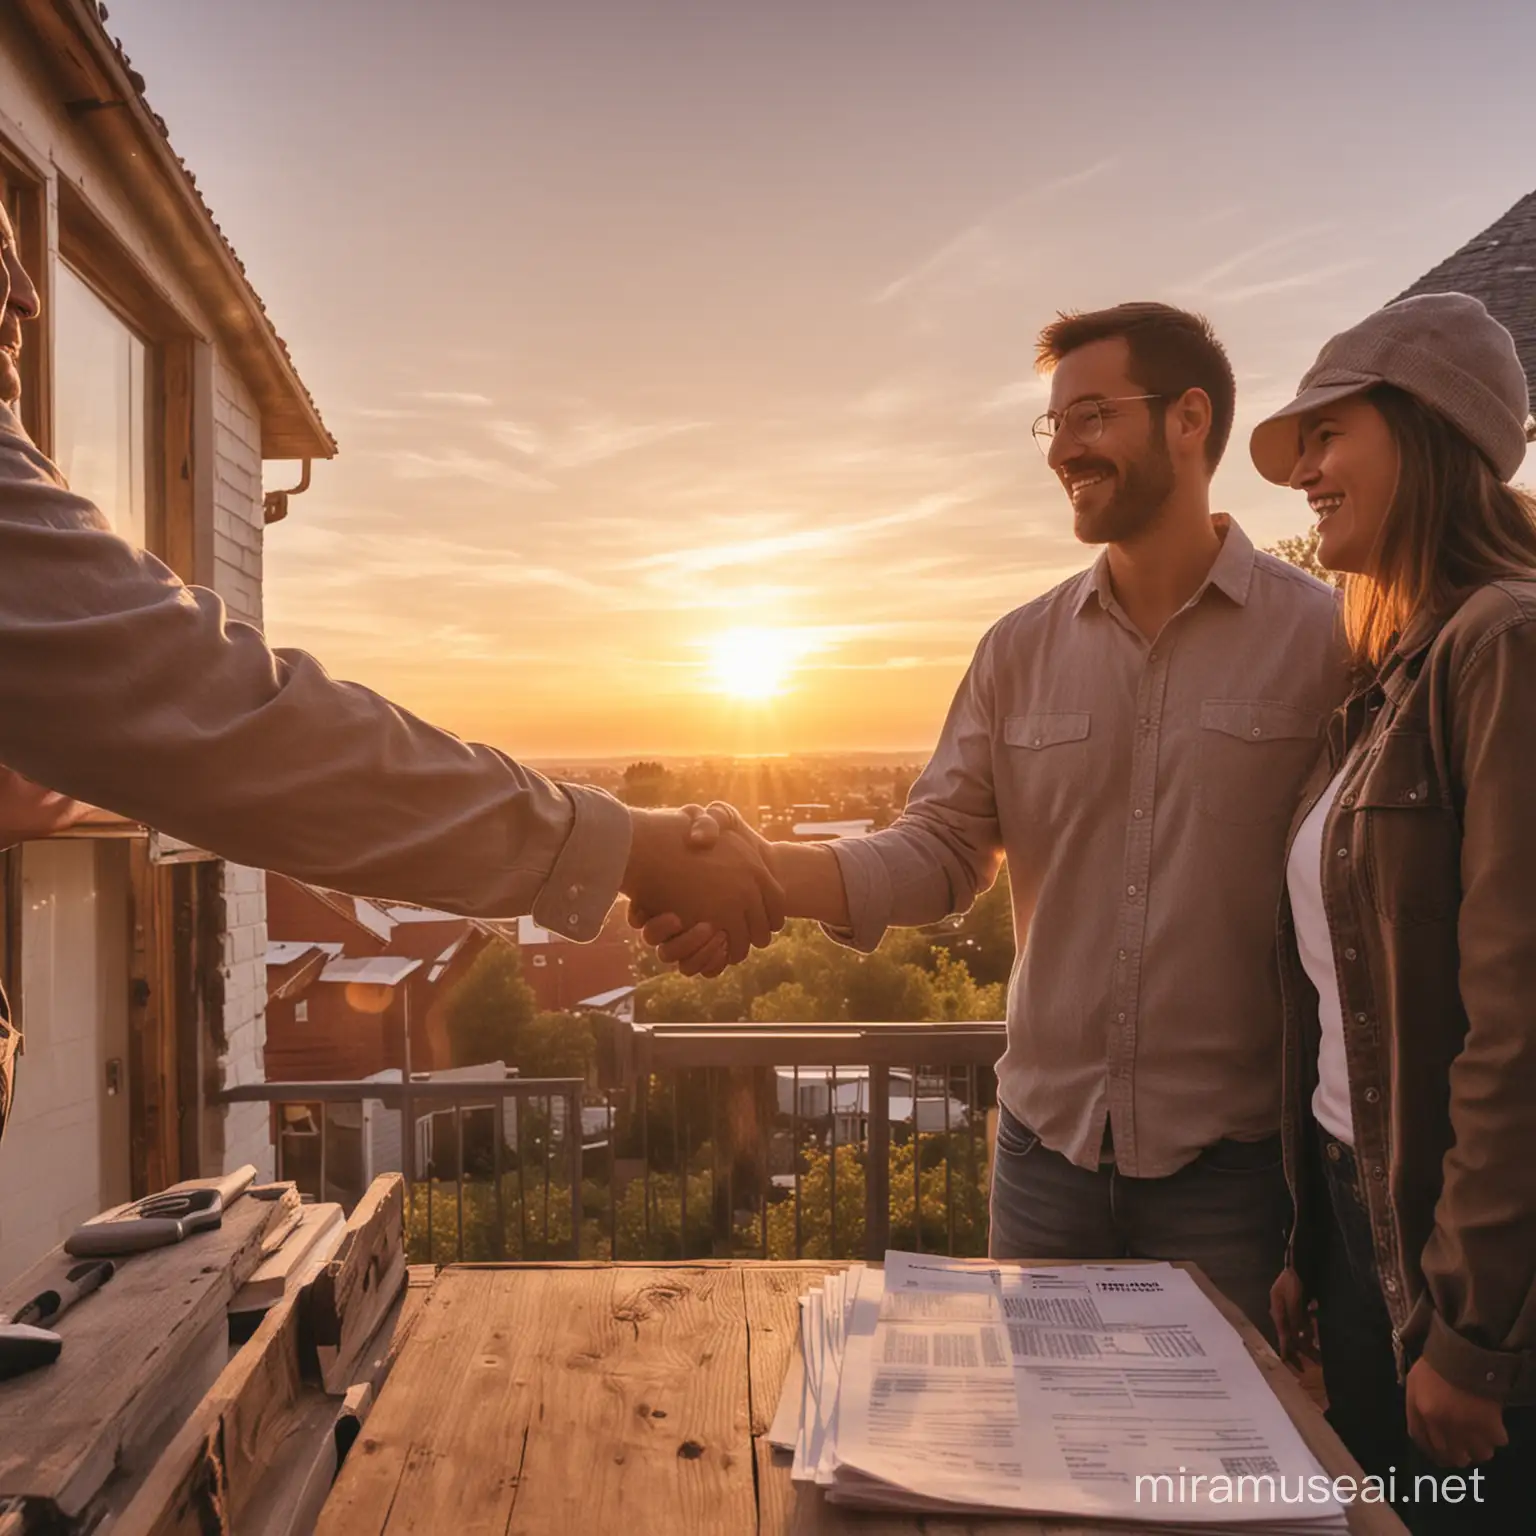 Home renovation agreement with home owner giving handshake with contractor with sunset flare